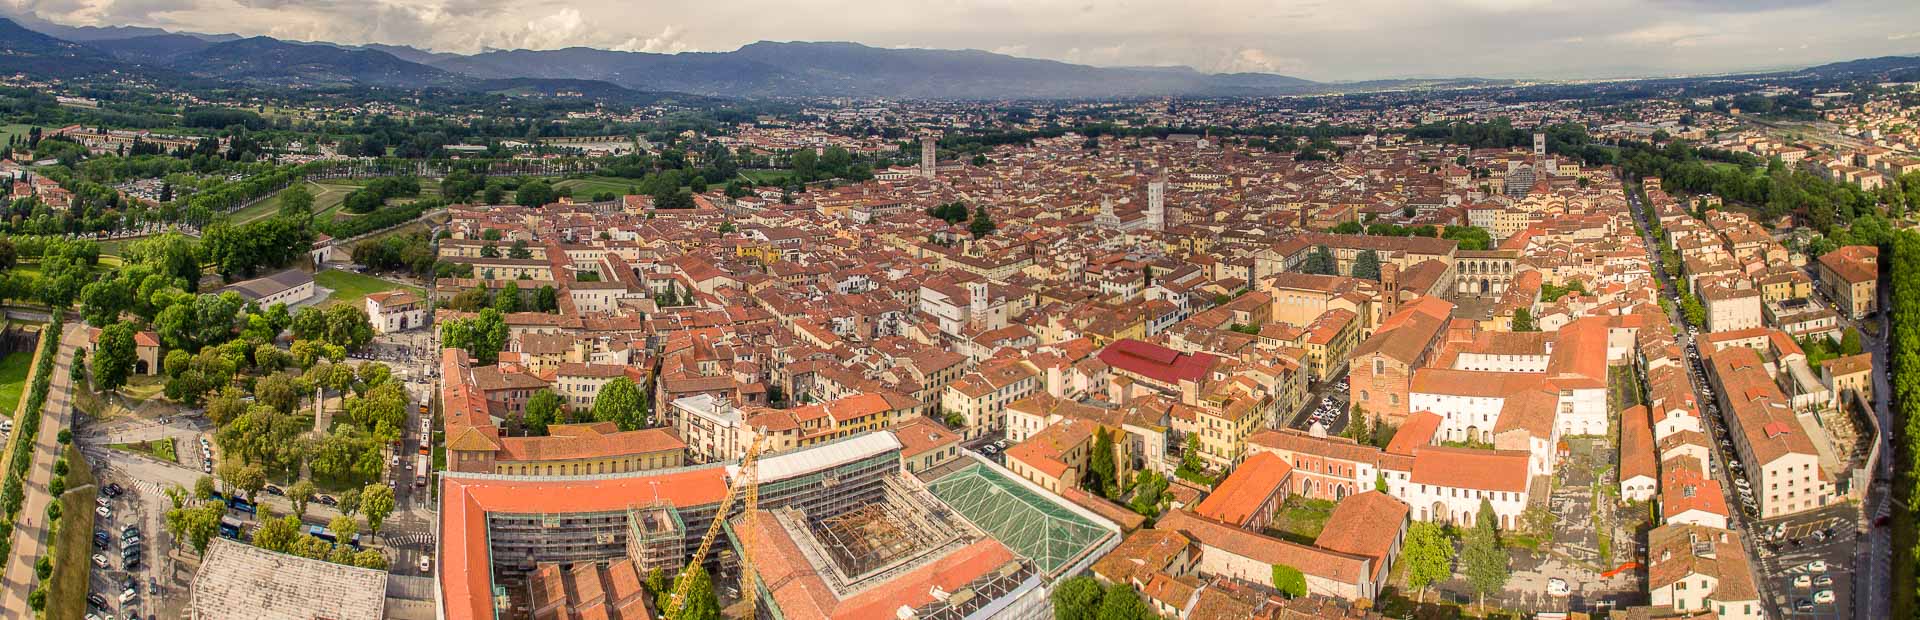 panorama of the walled town of Lucca